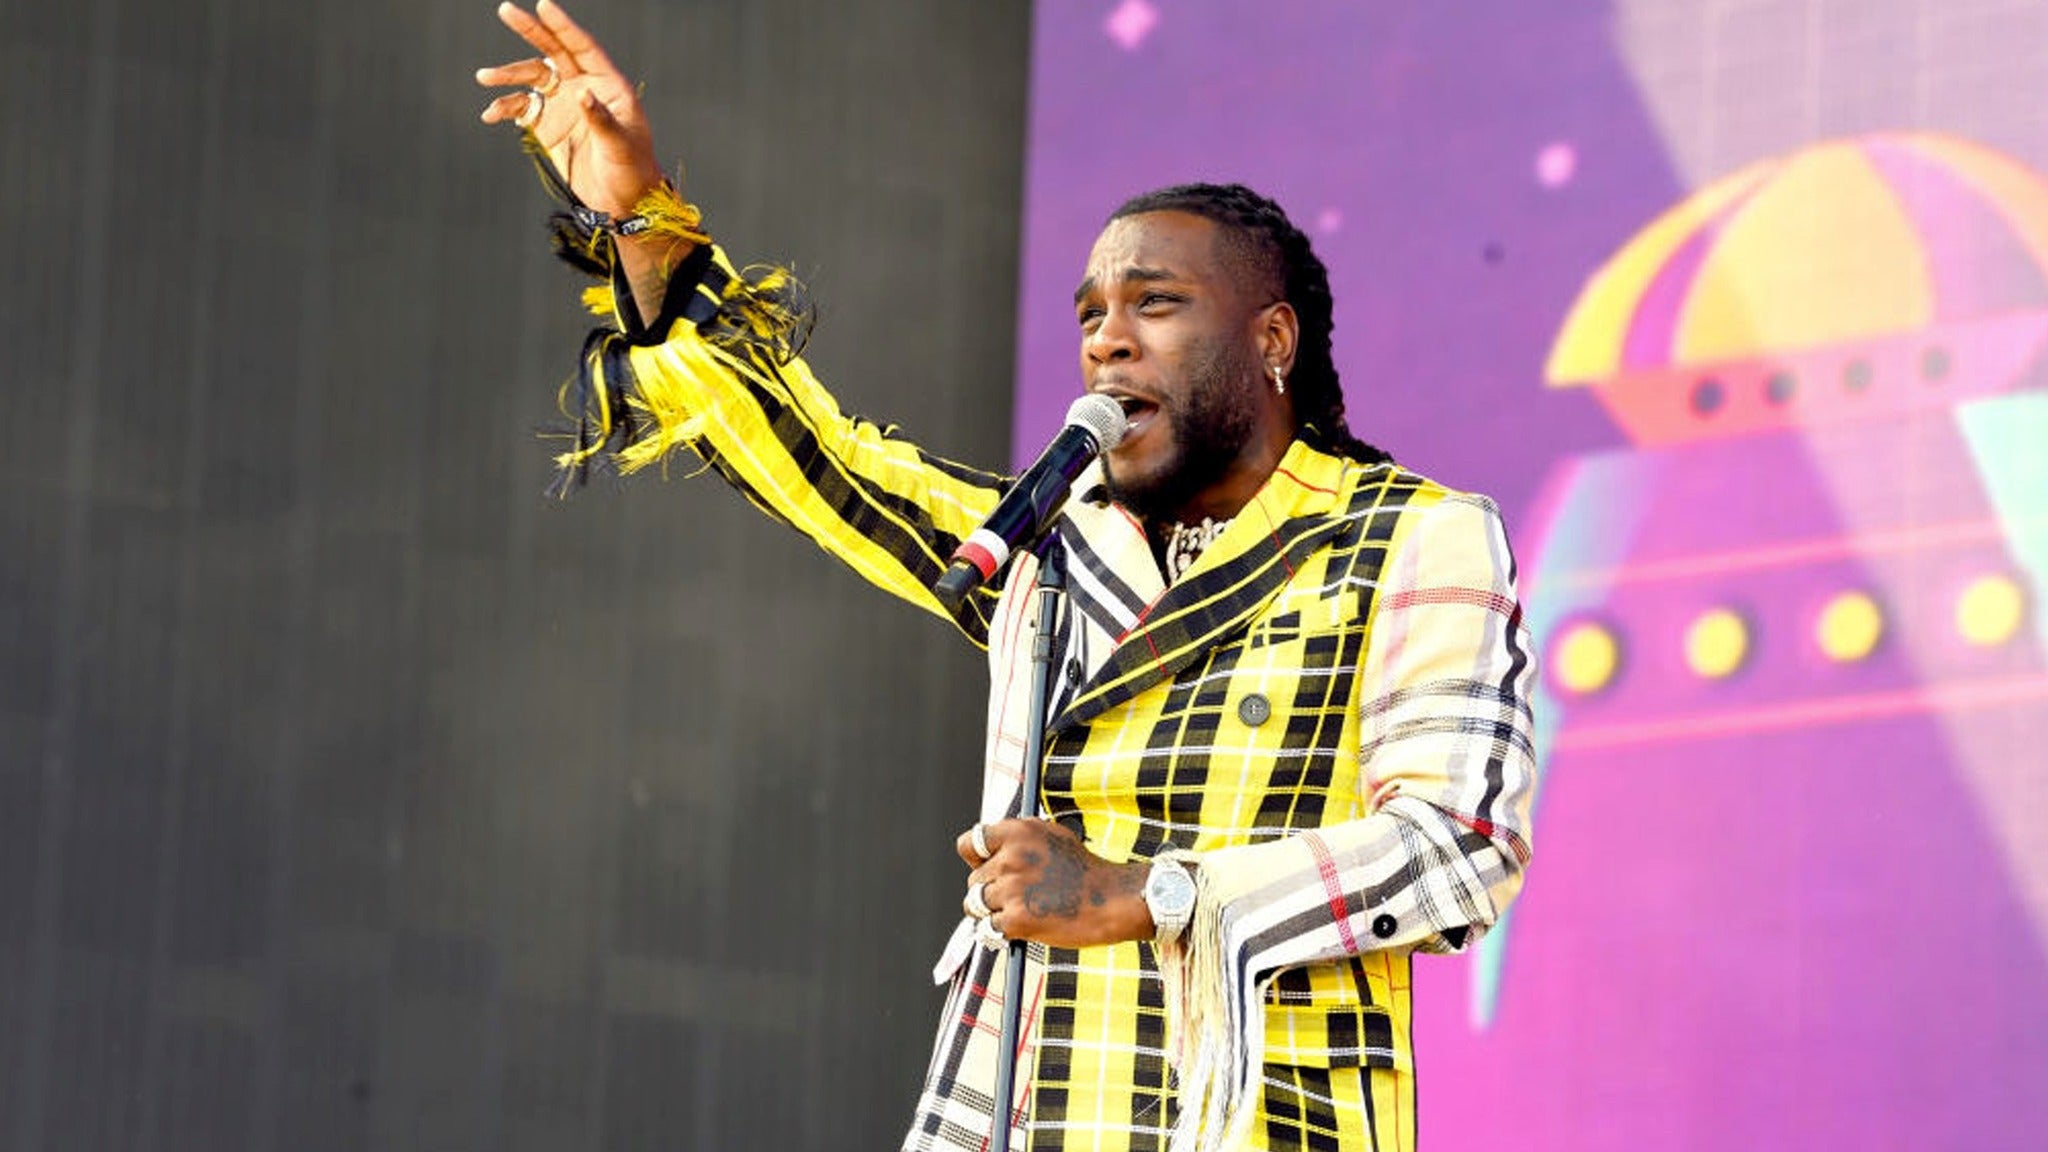 Burna Boy - Twice As Tall Tour in Dallas promo photo for Artist presale offer code